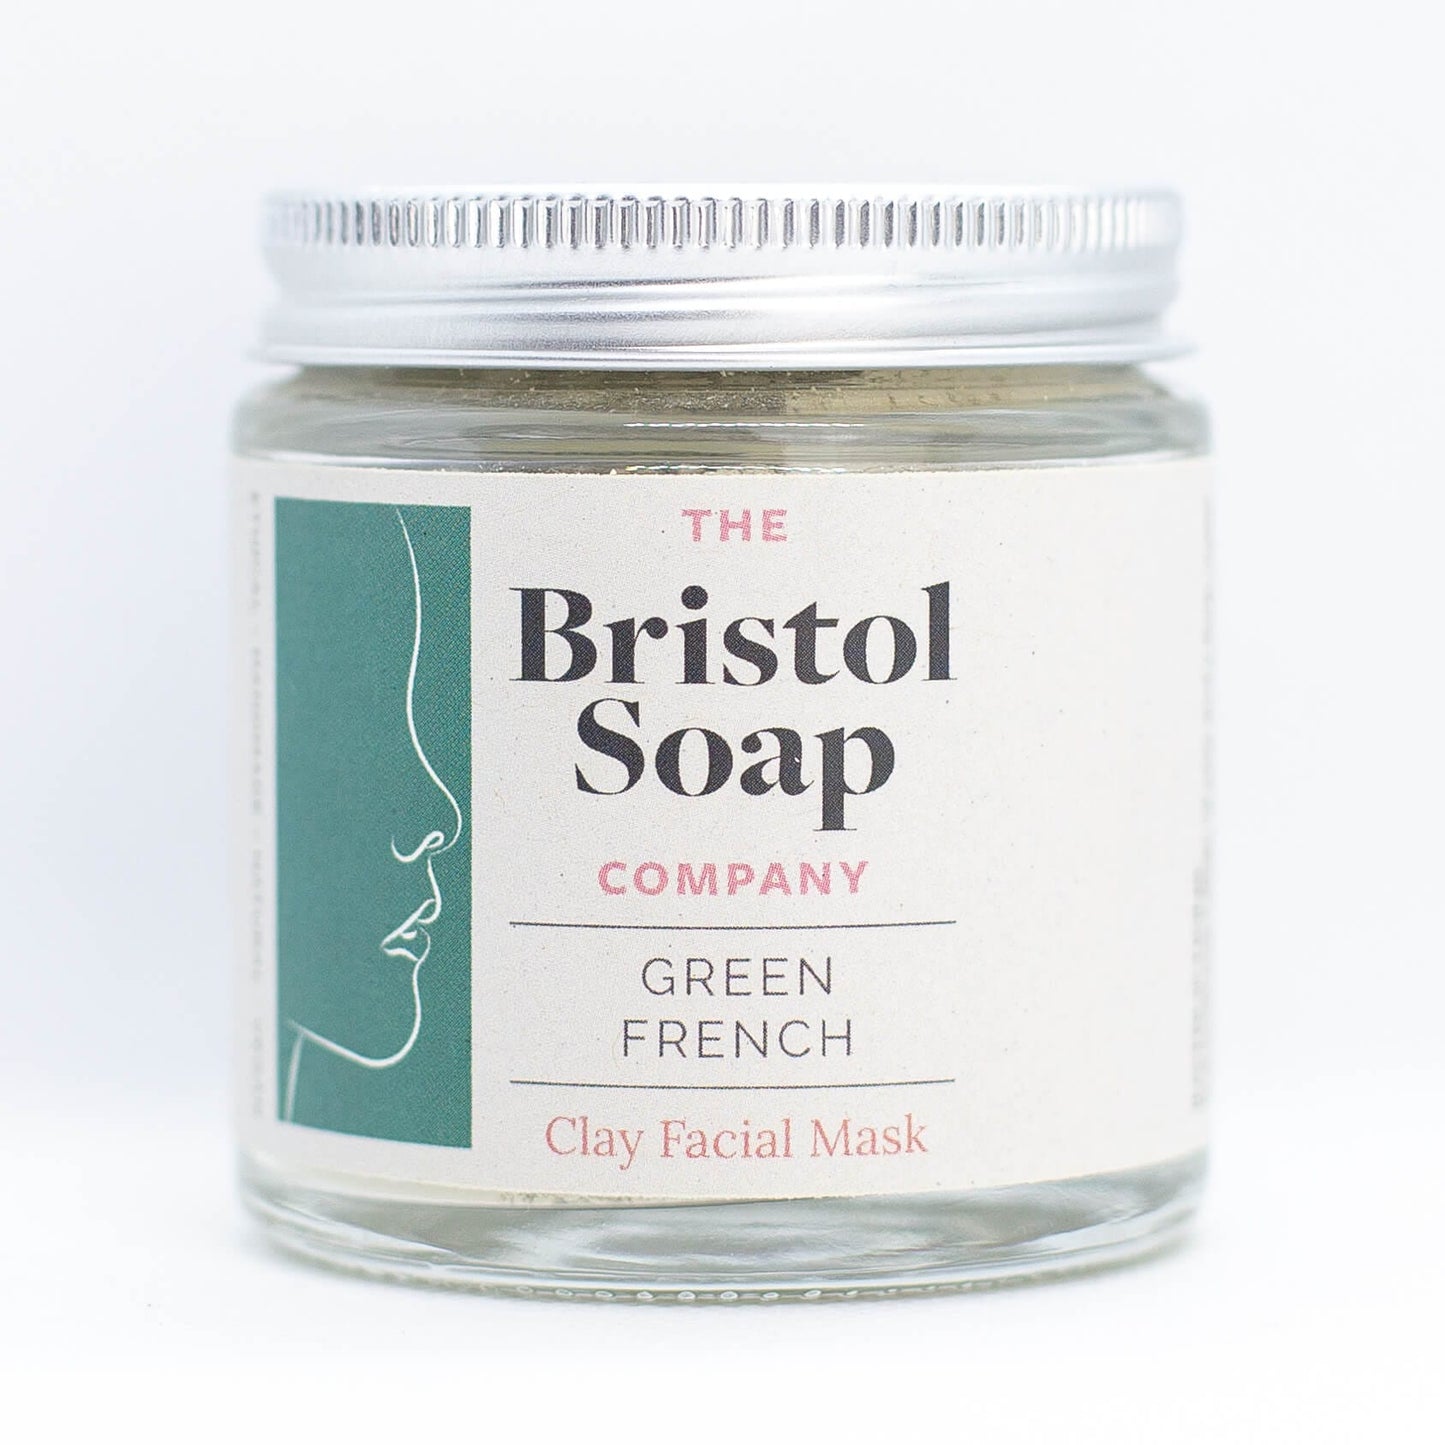 The Bristol Soap Company Face Mask Clay Face Mask (two blends)